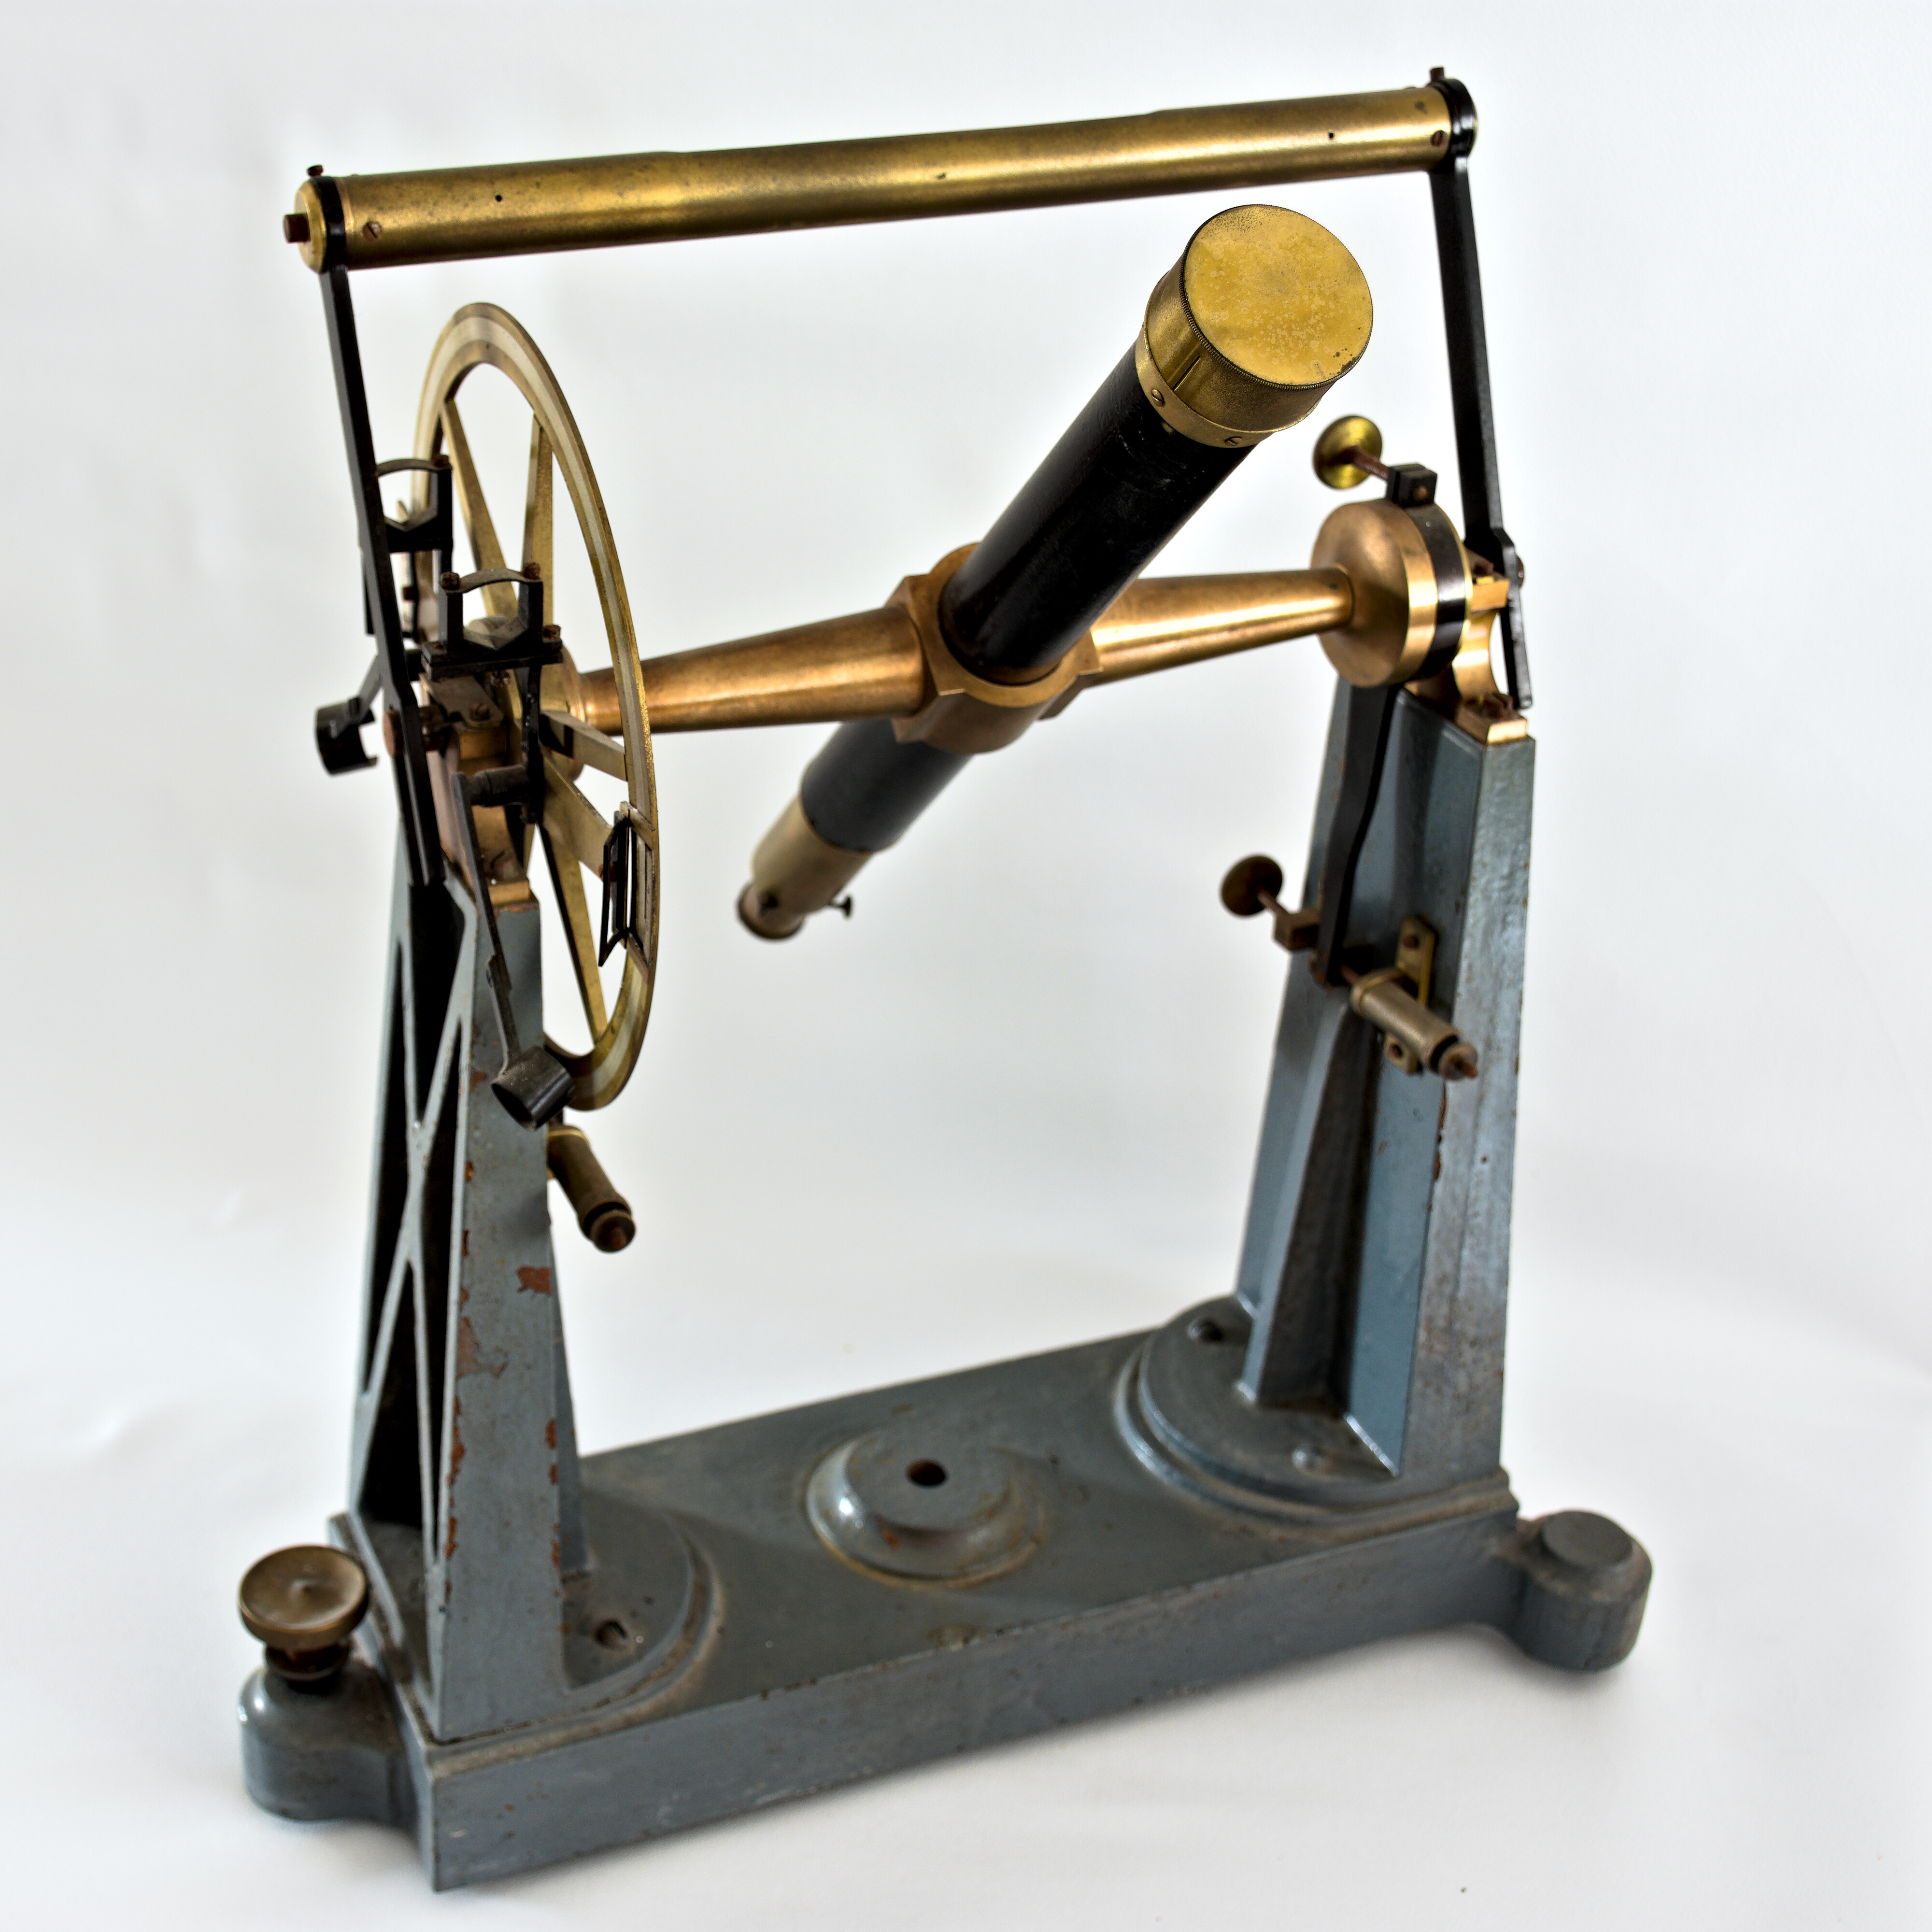 Fig. 1: The transit instrument bought from Miklós Konkoly Thege (Gothard Memorial Exhibition)